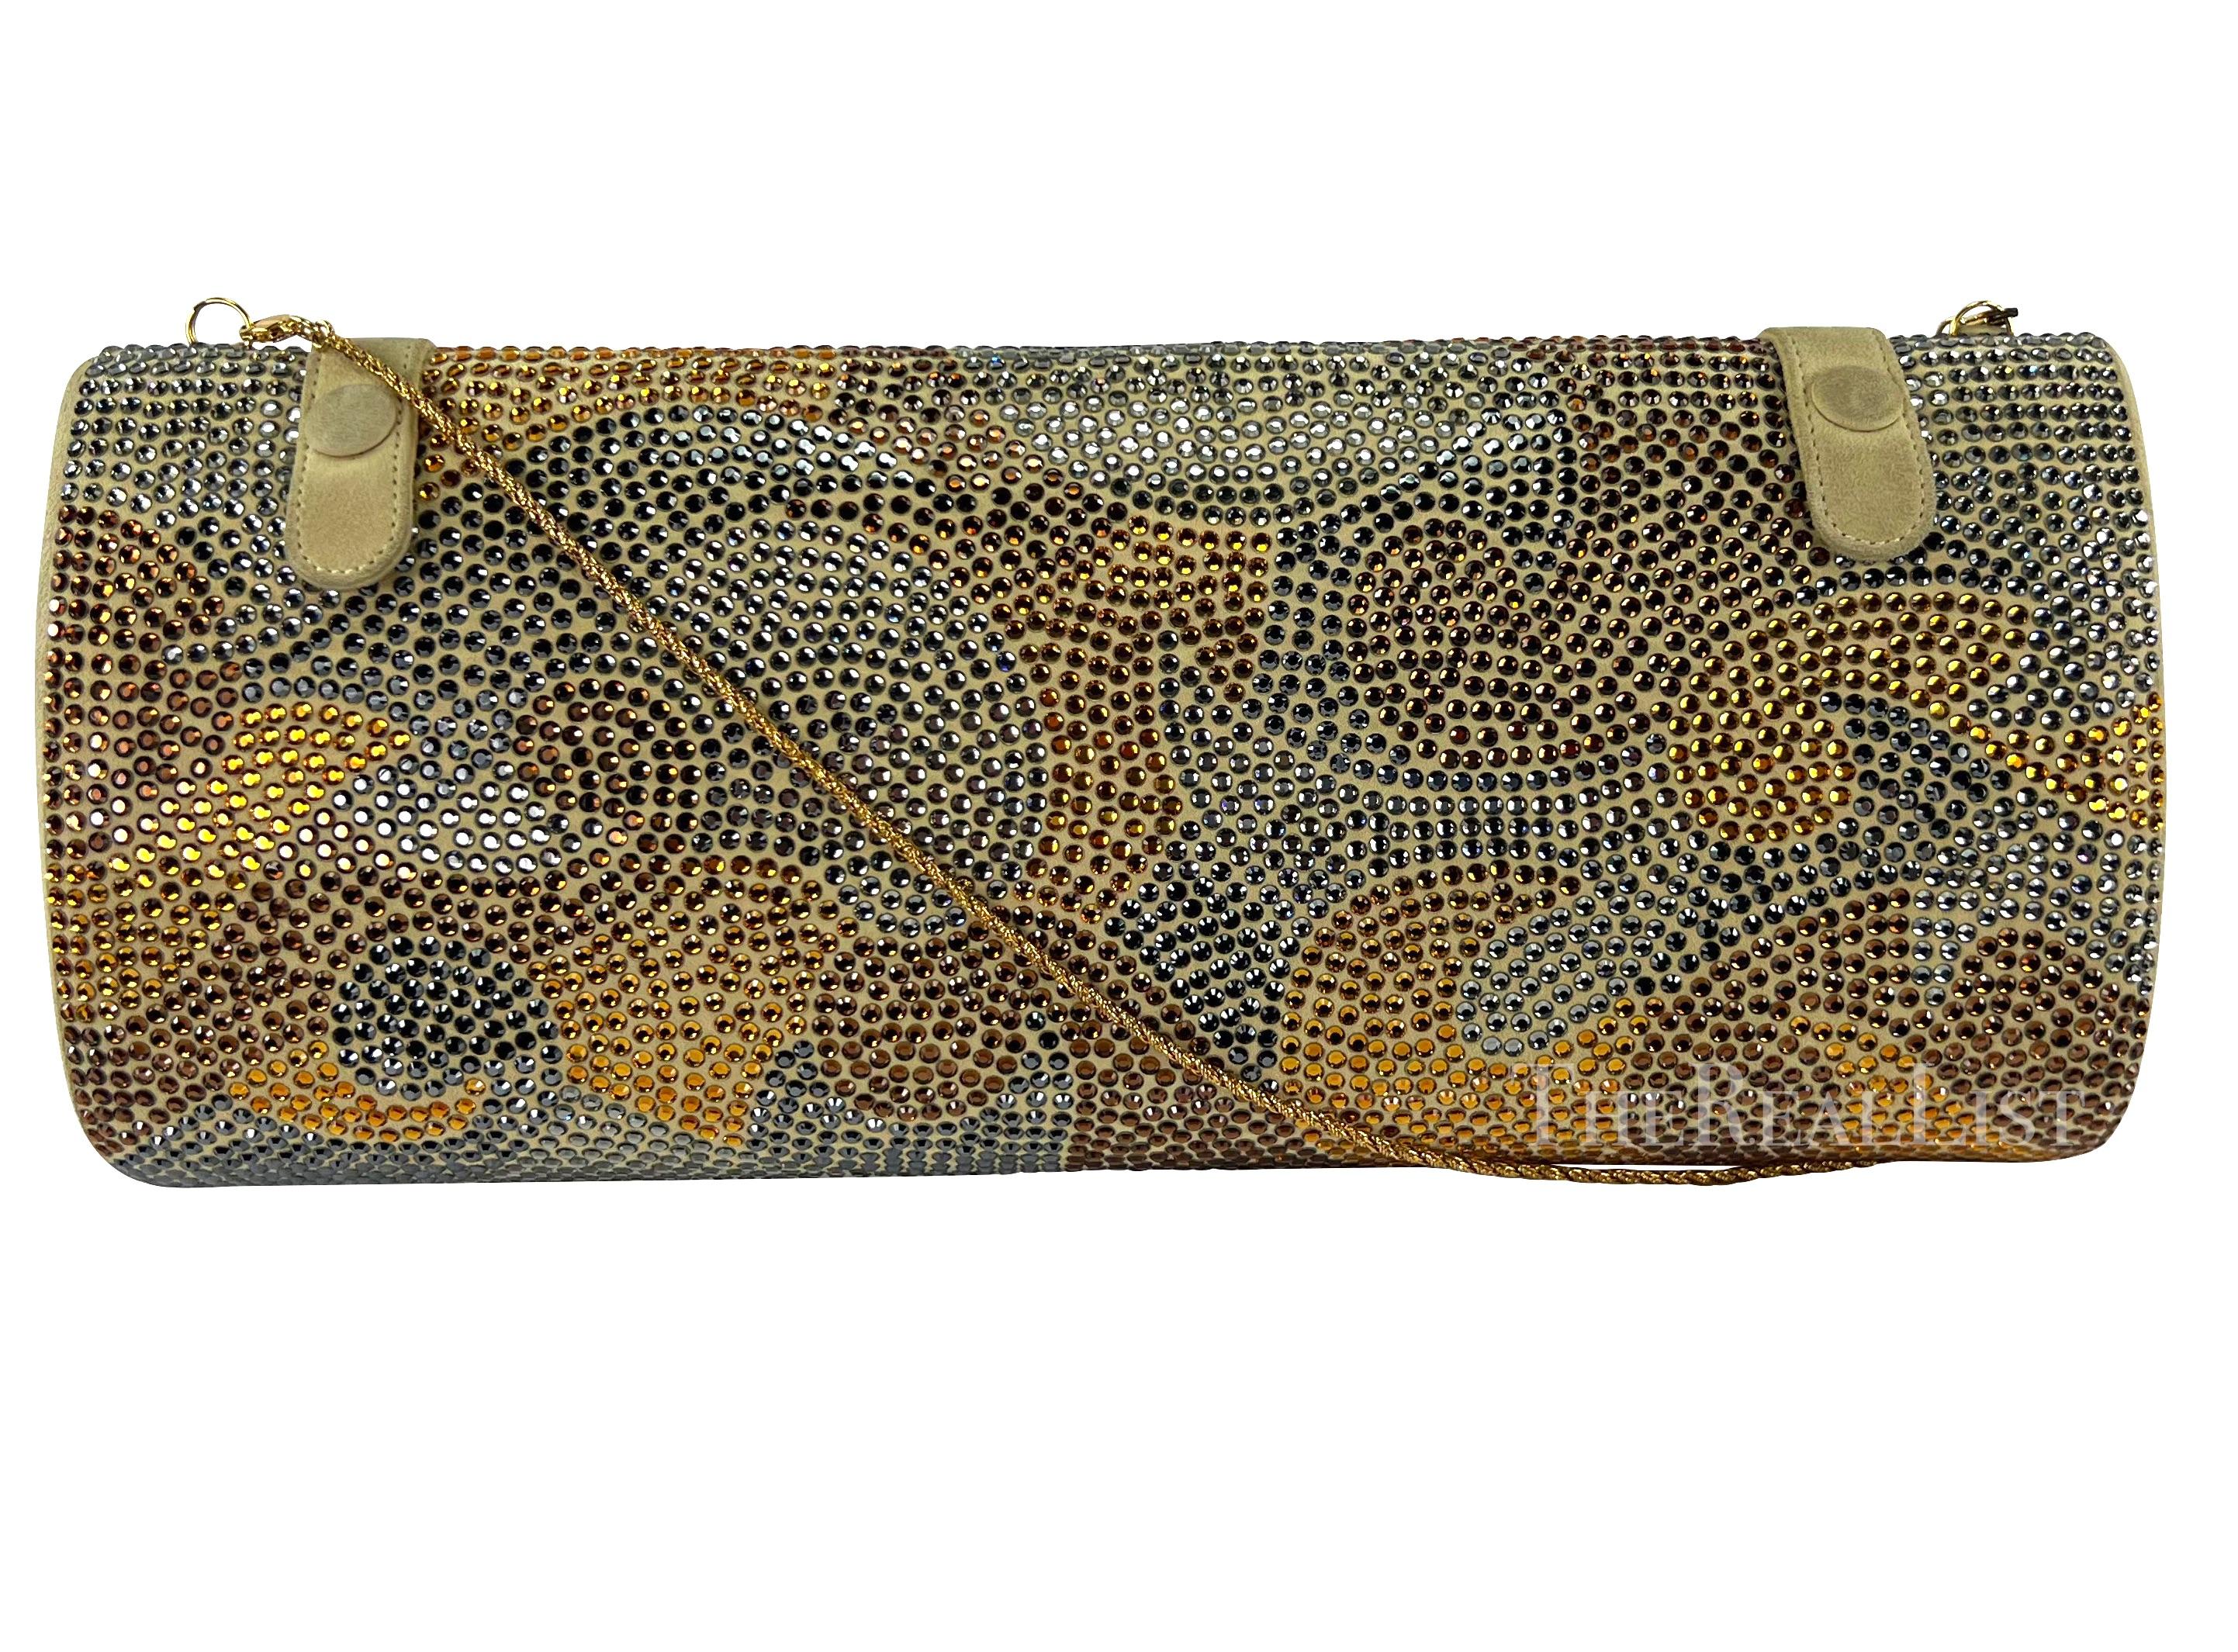 S/S 2000 Gianni Versace by Donatella Runway Gold Abstract Rhinestone Clutch In Good Condition For Sale In West Hollywood, CA